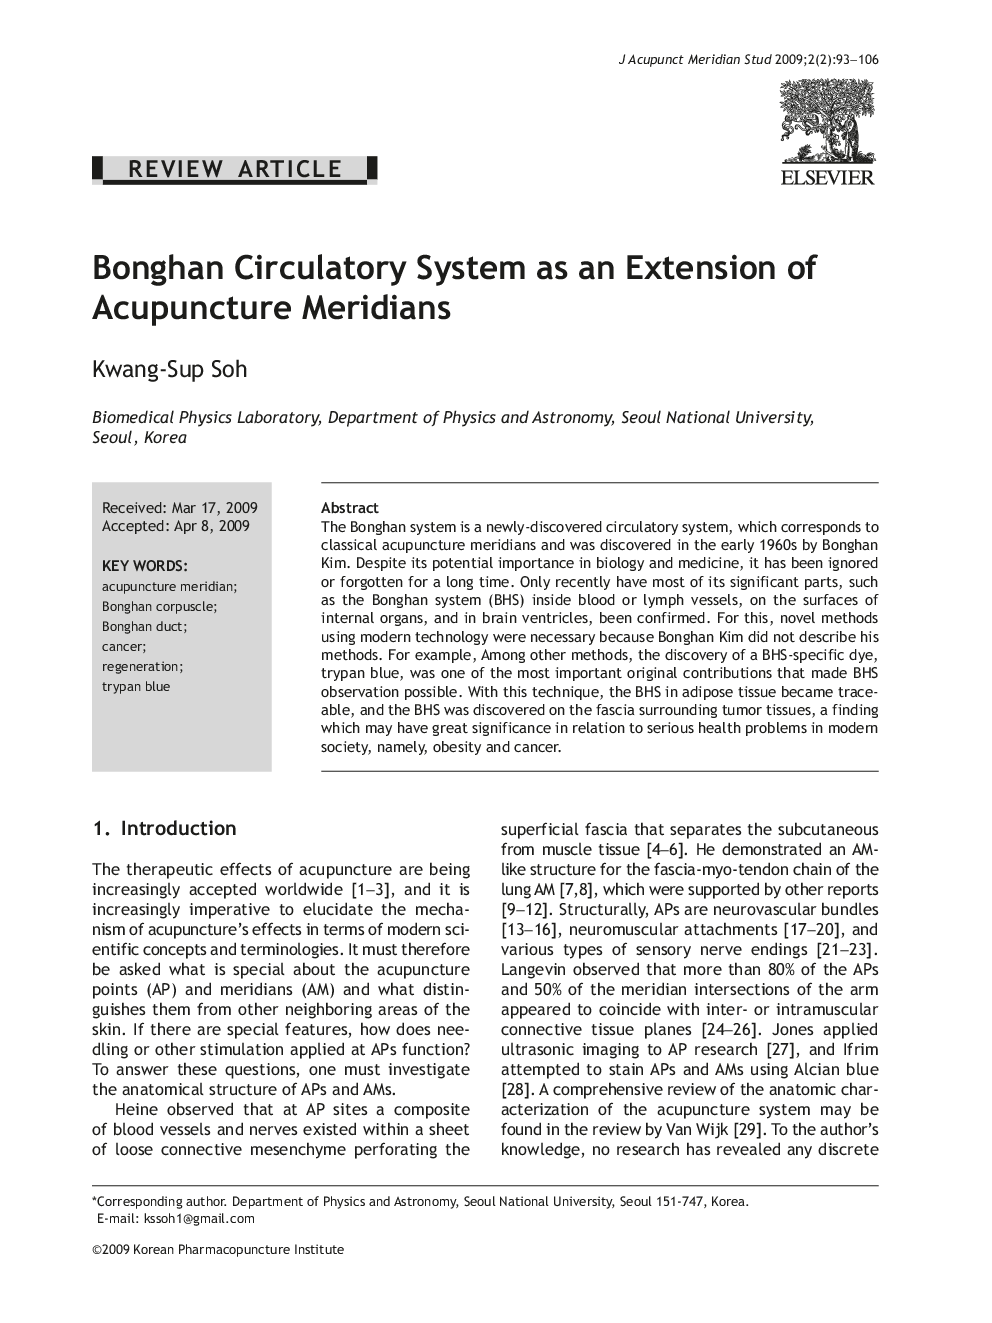 Bonghan Circulatory System as an Extension of Acupuncture Meridians